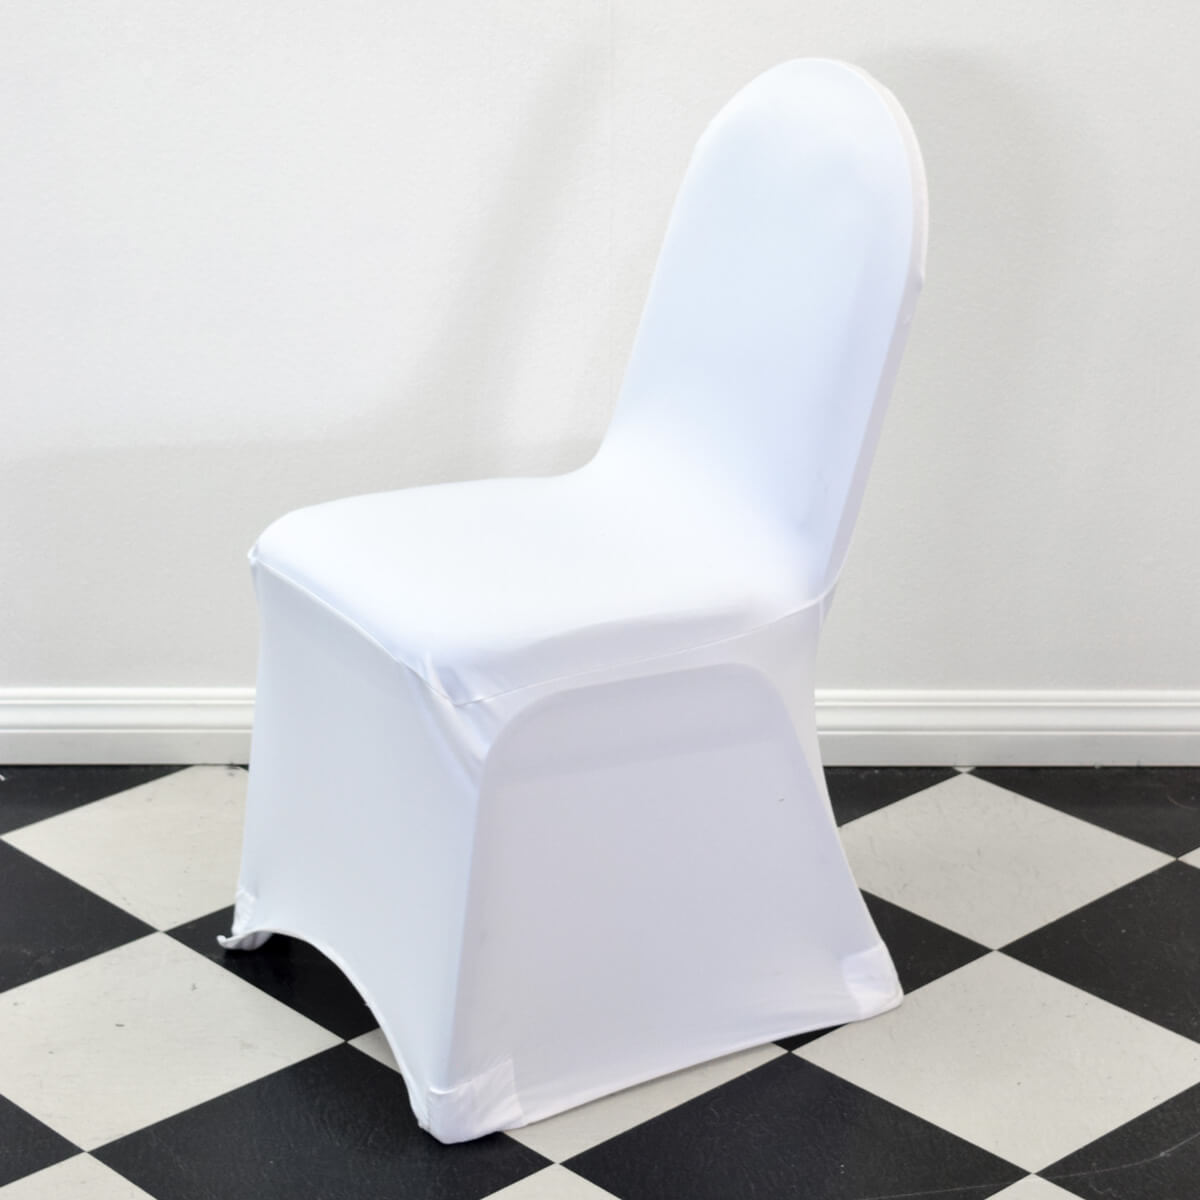 Chair Covers for hire